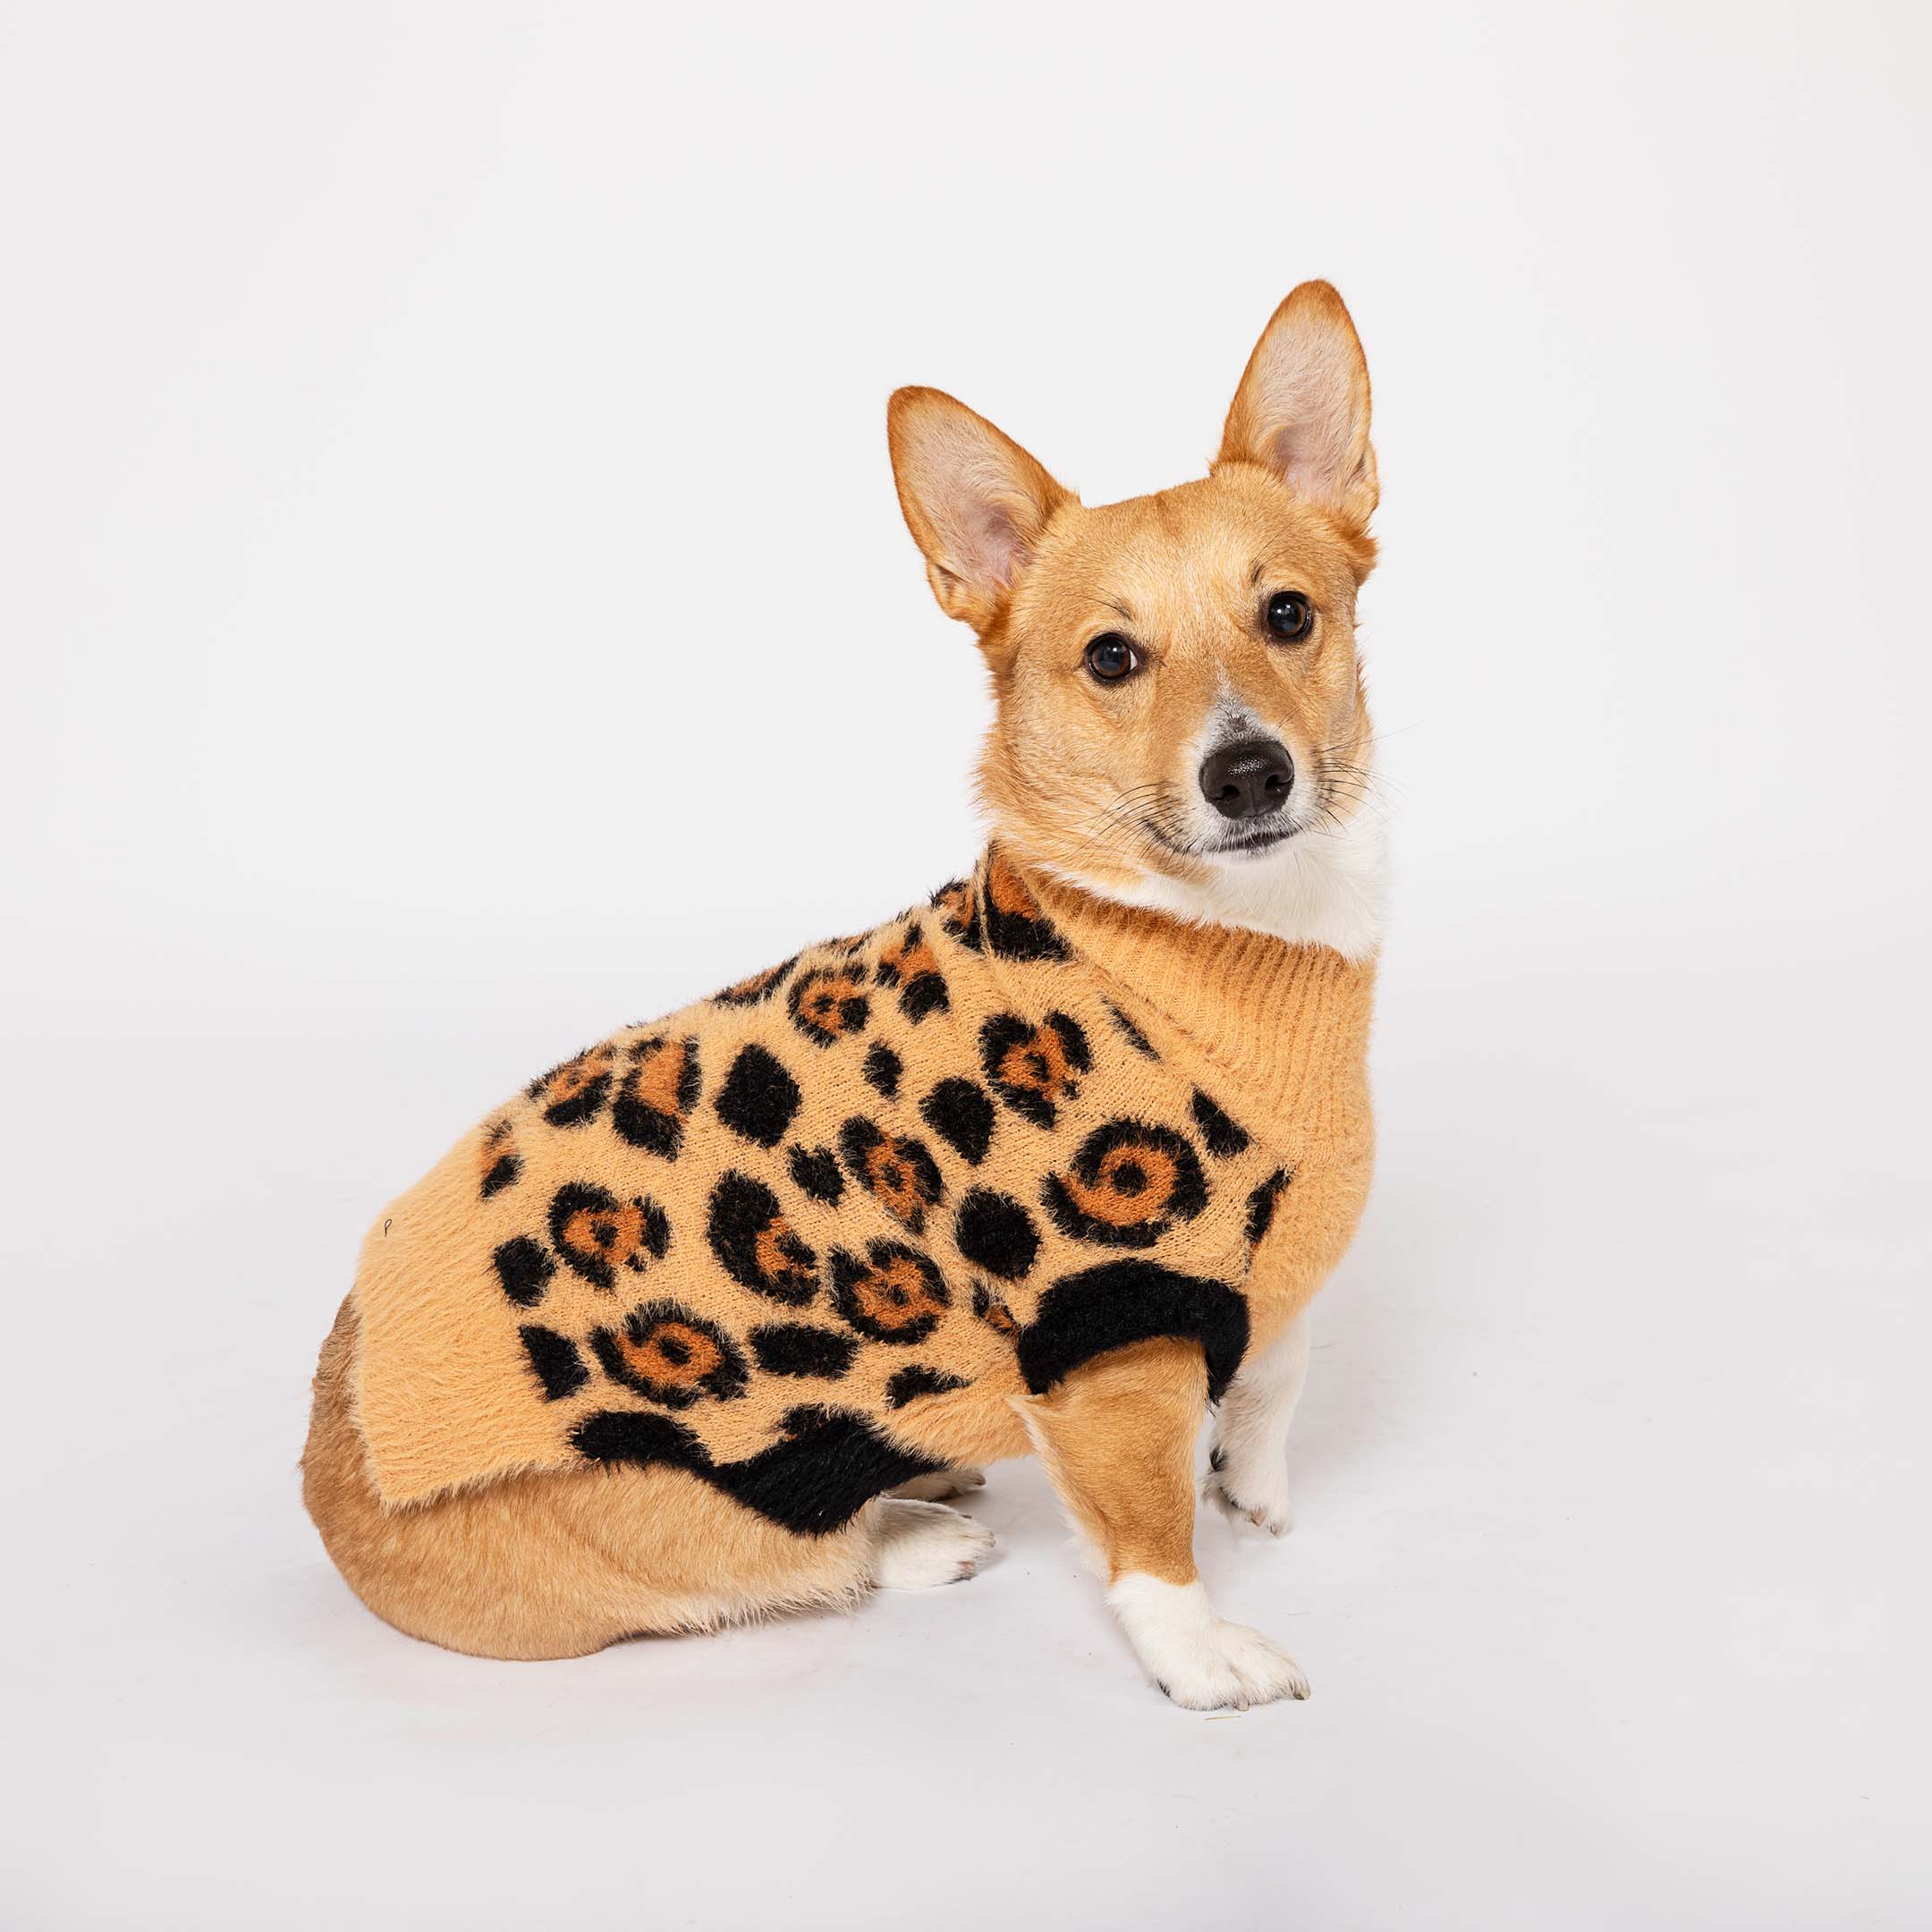 A Corgi dog looking poised in a tan and black leopard print sweater, offering a blend of wild style and cozy comfort, set against a white background.